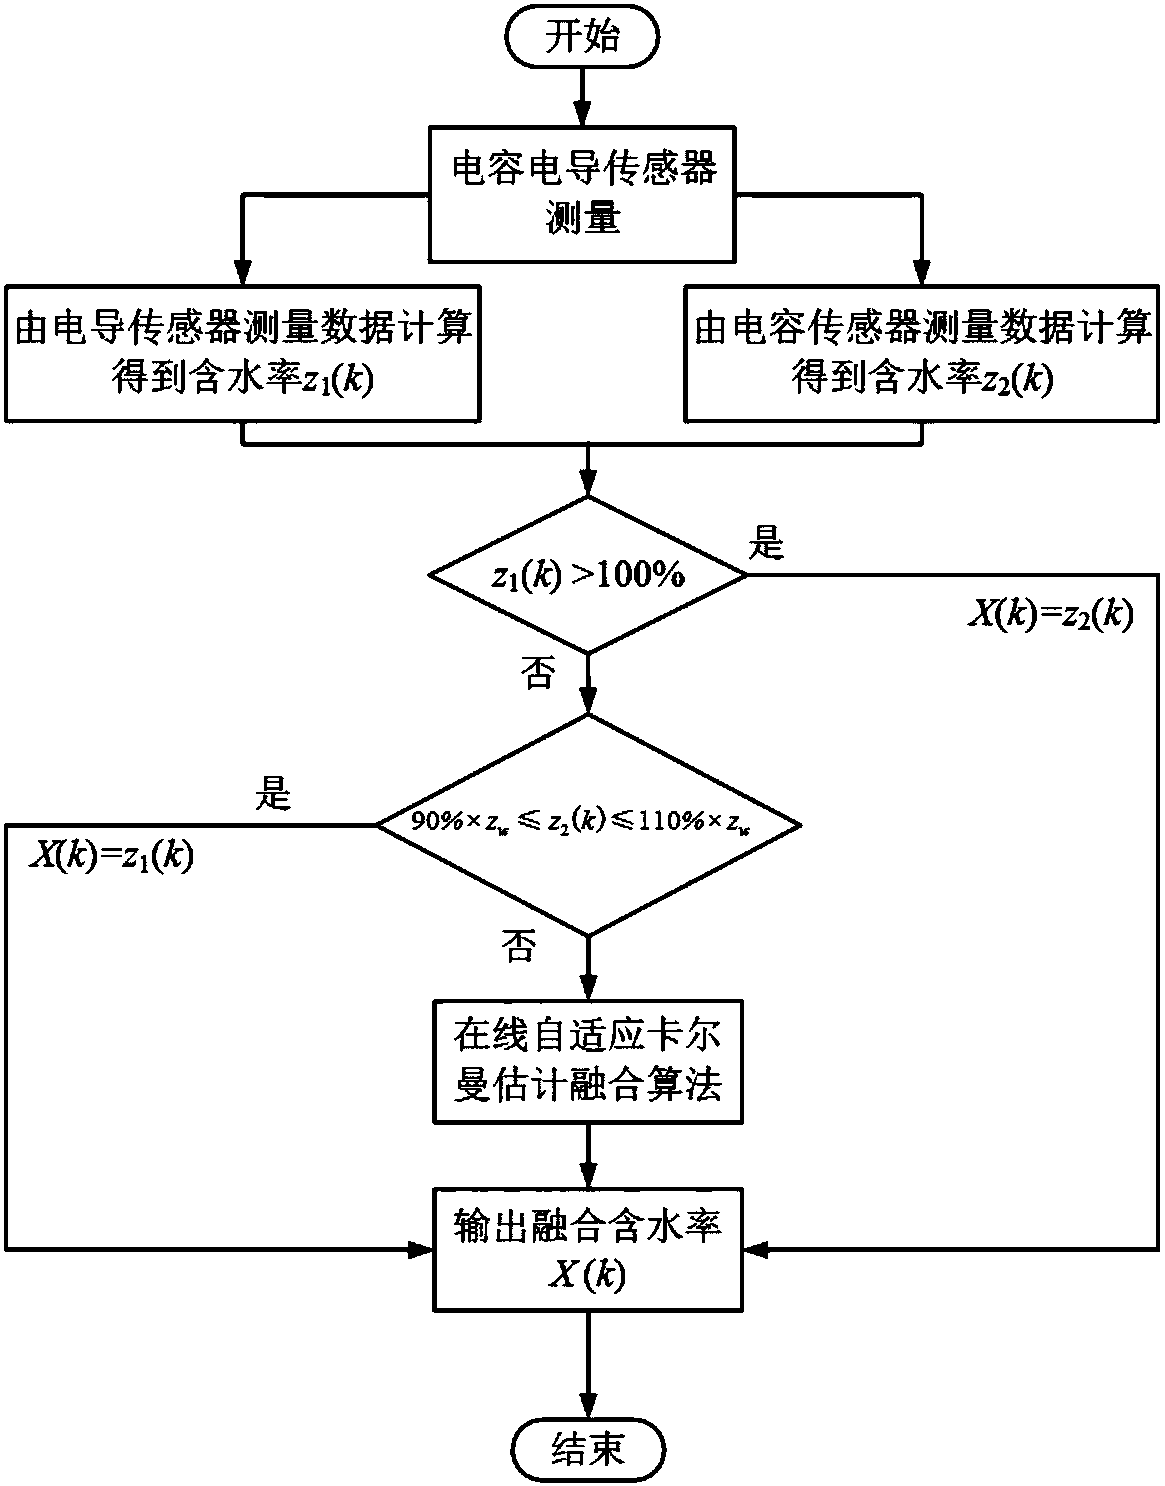 Adaptive Estimation Method of Water Cut in Two-Phase Flow